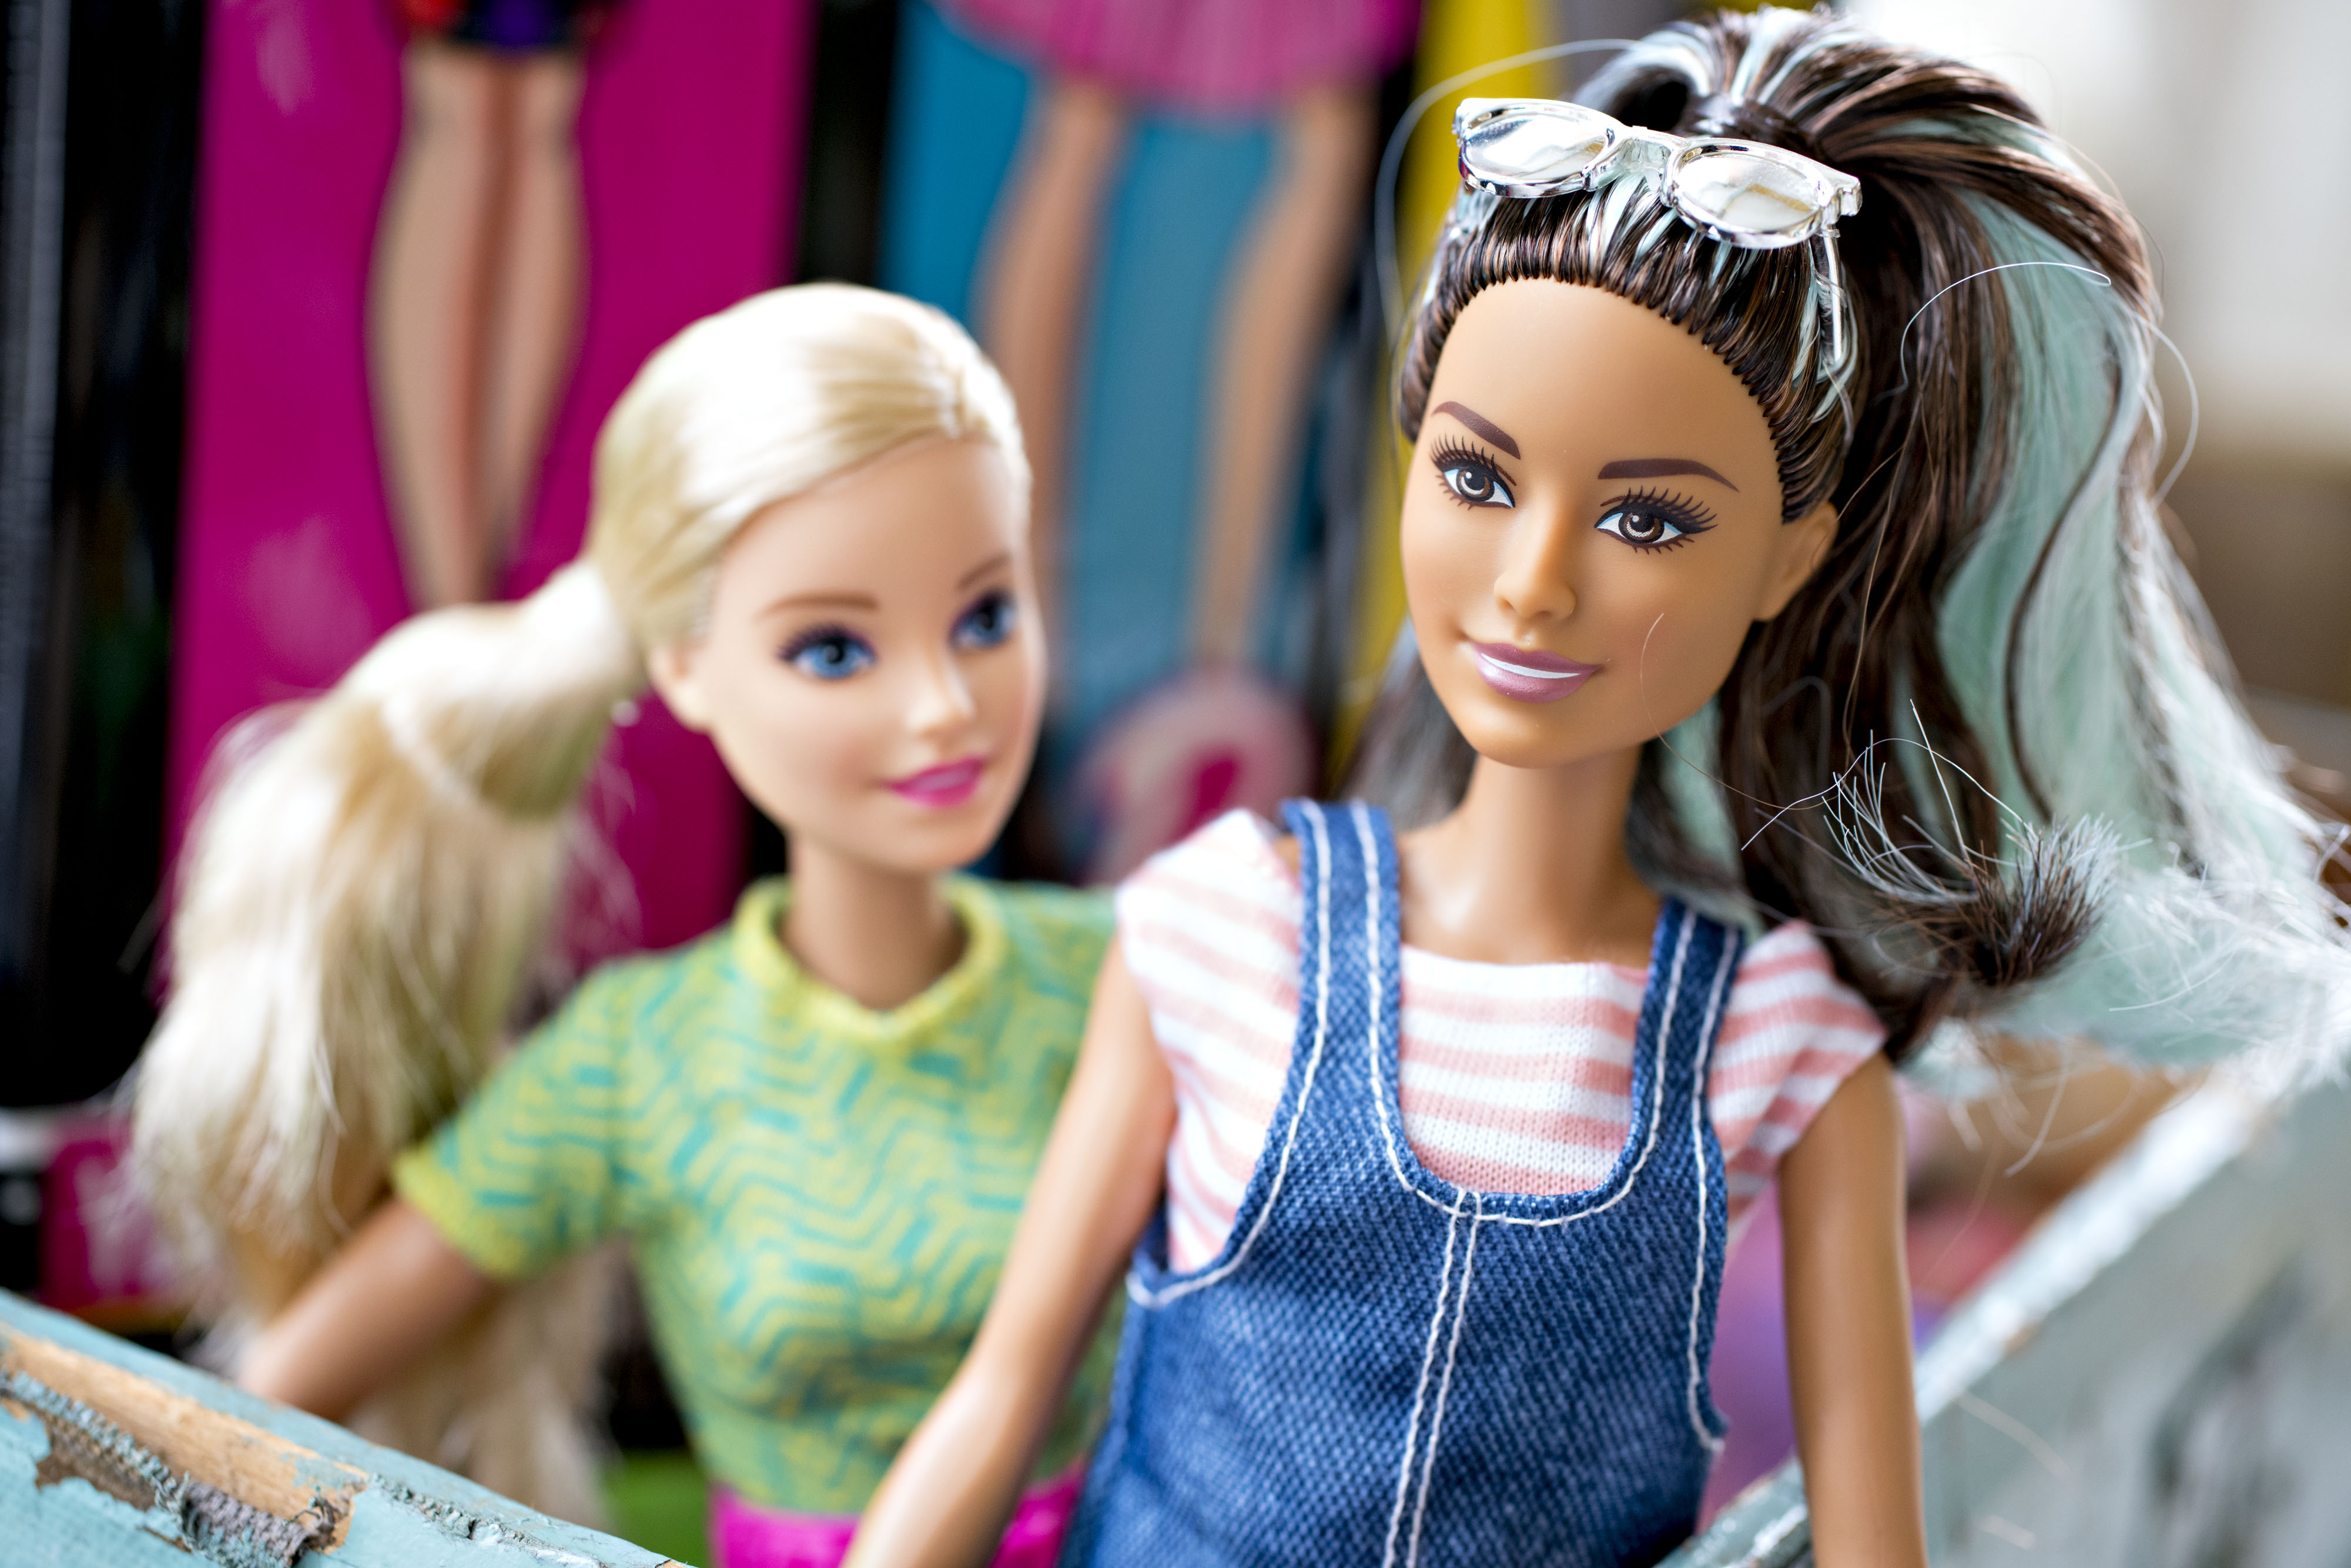 Grammatica vaak Flitsend Barbie Dolls: Sales Are Booming for Mattel (MAT) During Covid-19 Pandemic -  Bloomberg